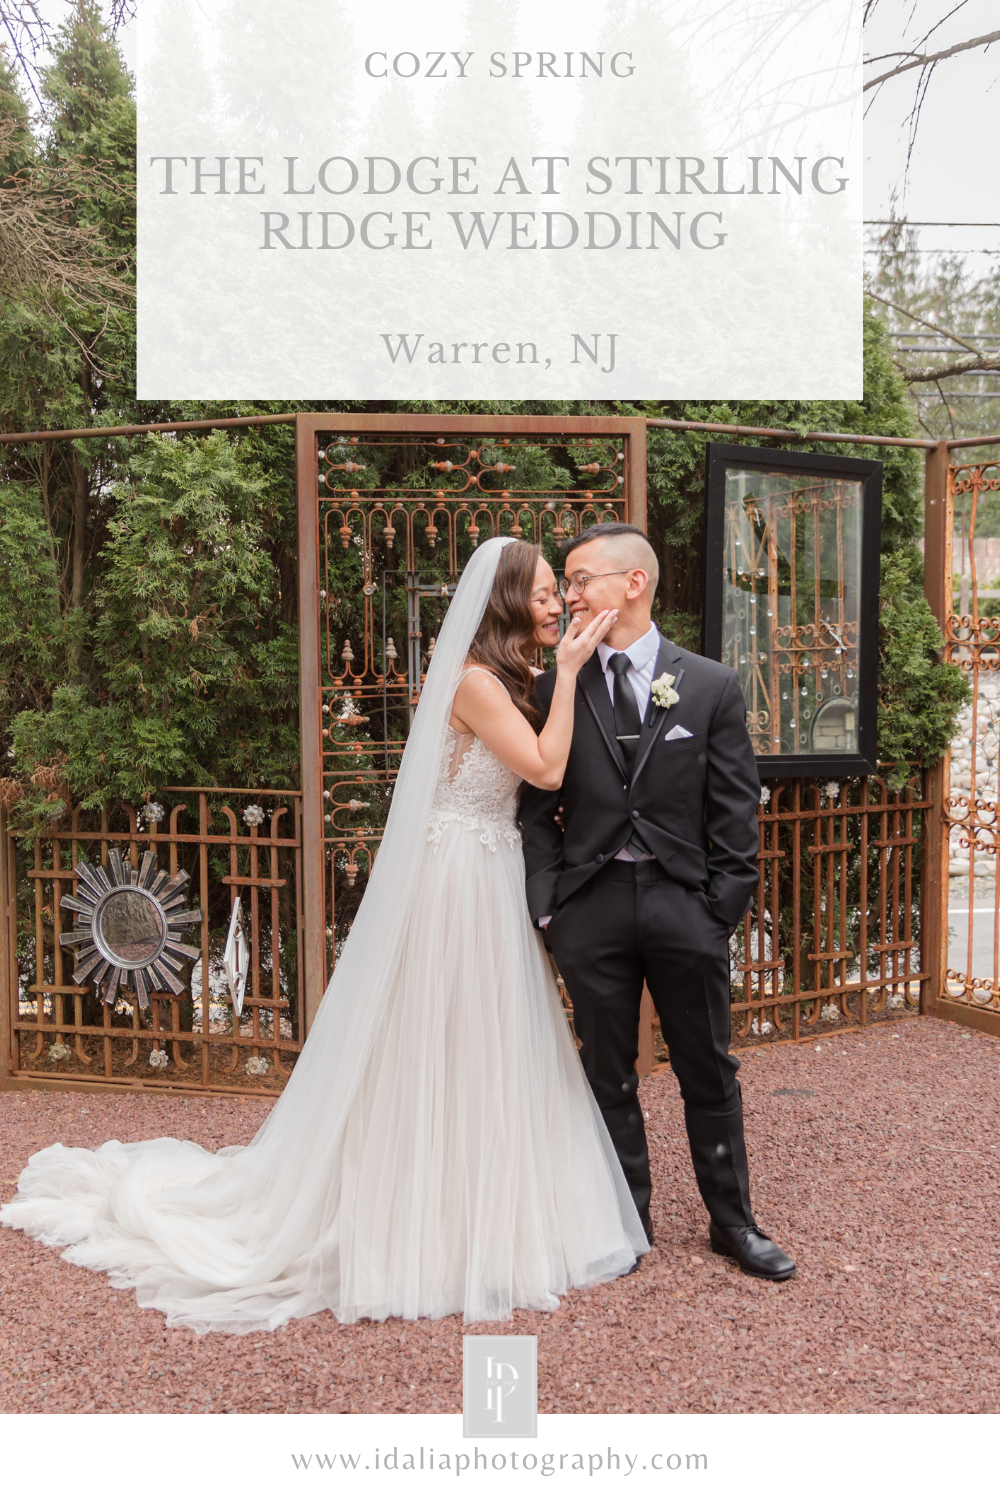 The Lodge at Stirling Ridge wedding in Warren NJ photographed by Idalia Photography